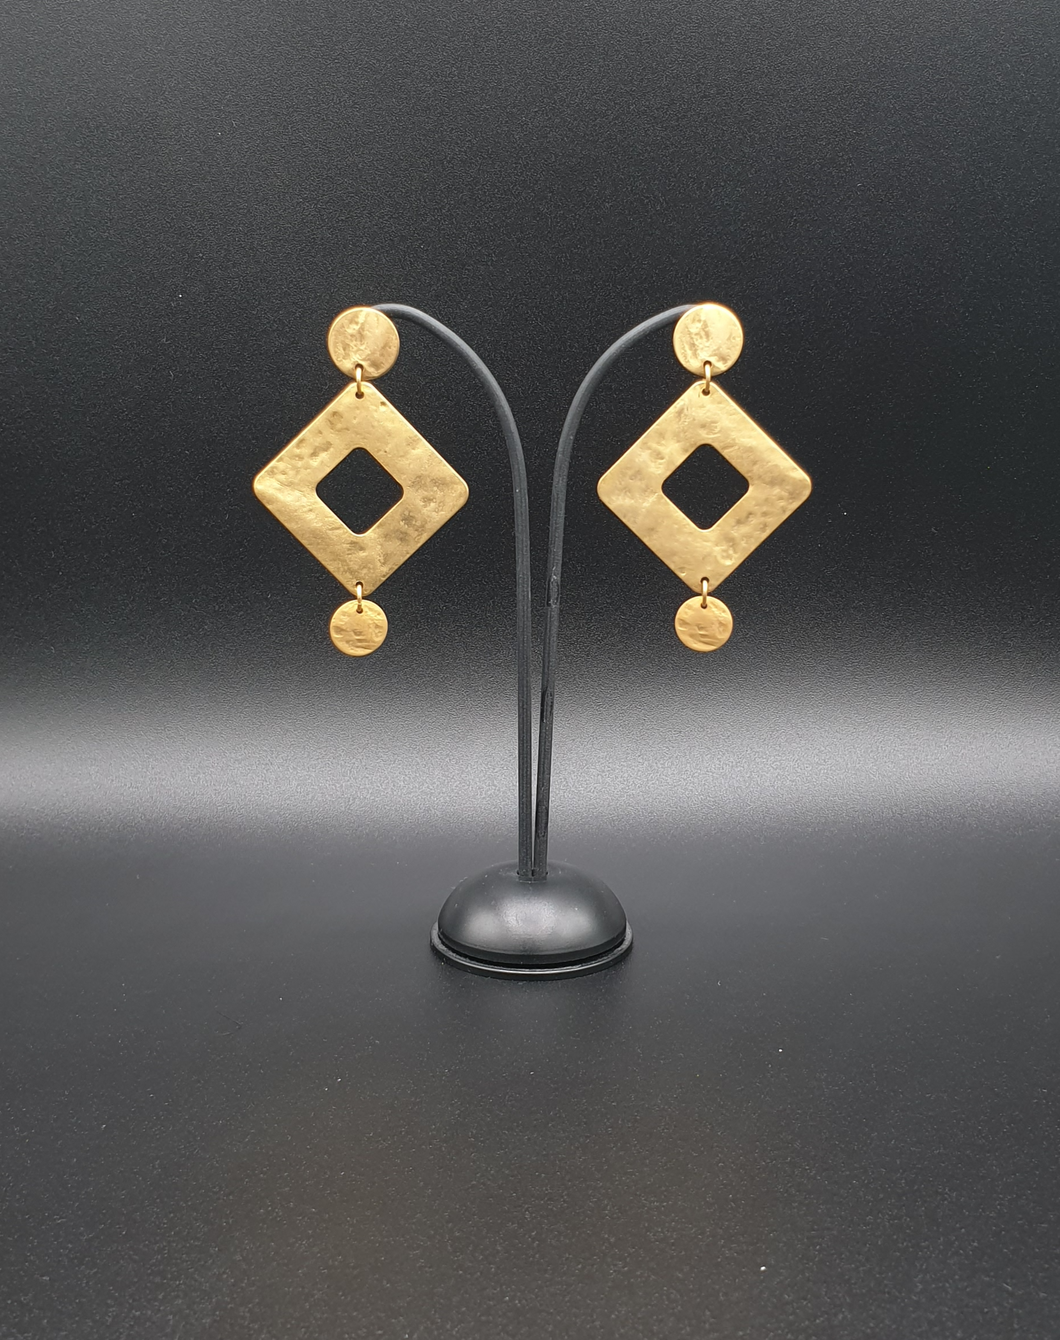 golden metal stud earrings with decorative square elements